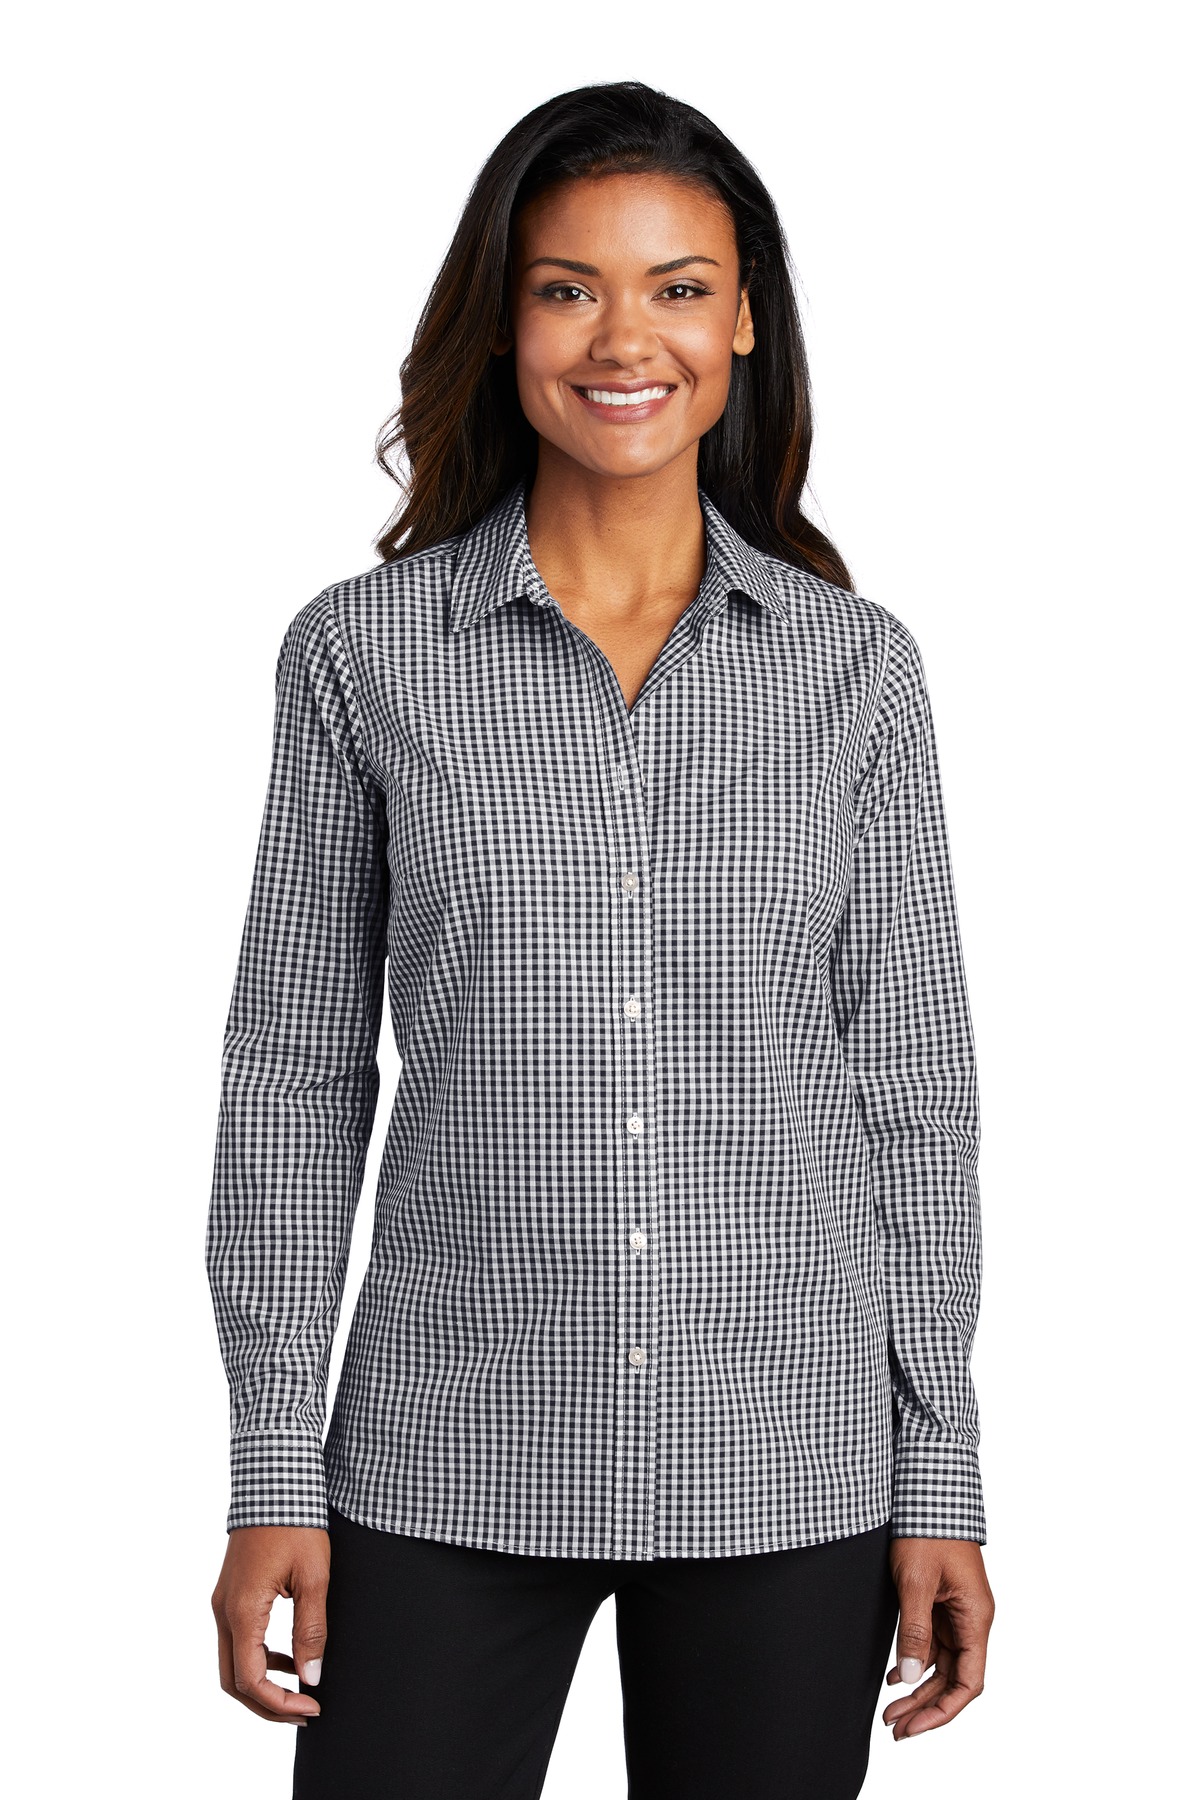 Port Authority Ladies Woven Shirts for Hospitality- ® Ladies Broadcloth Gingham Easy Care Shirt-Port Authority